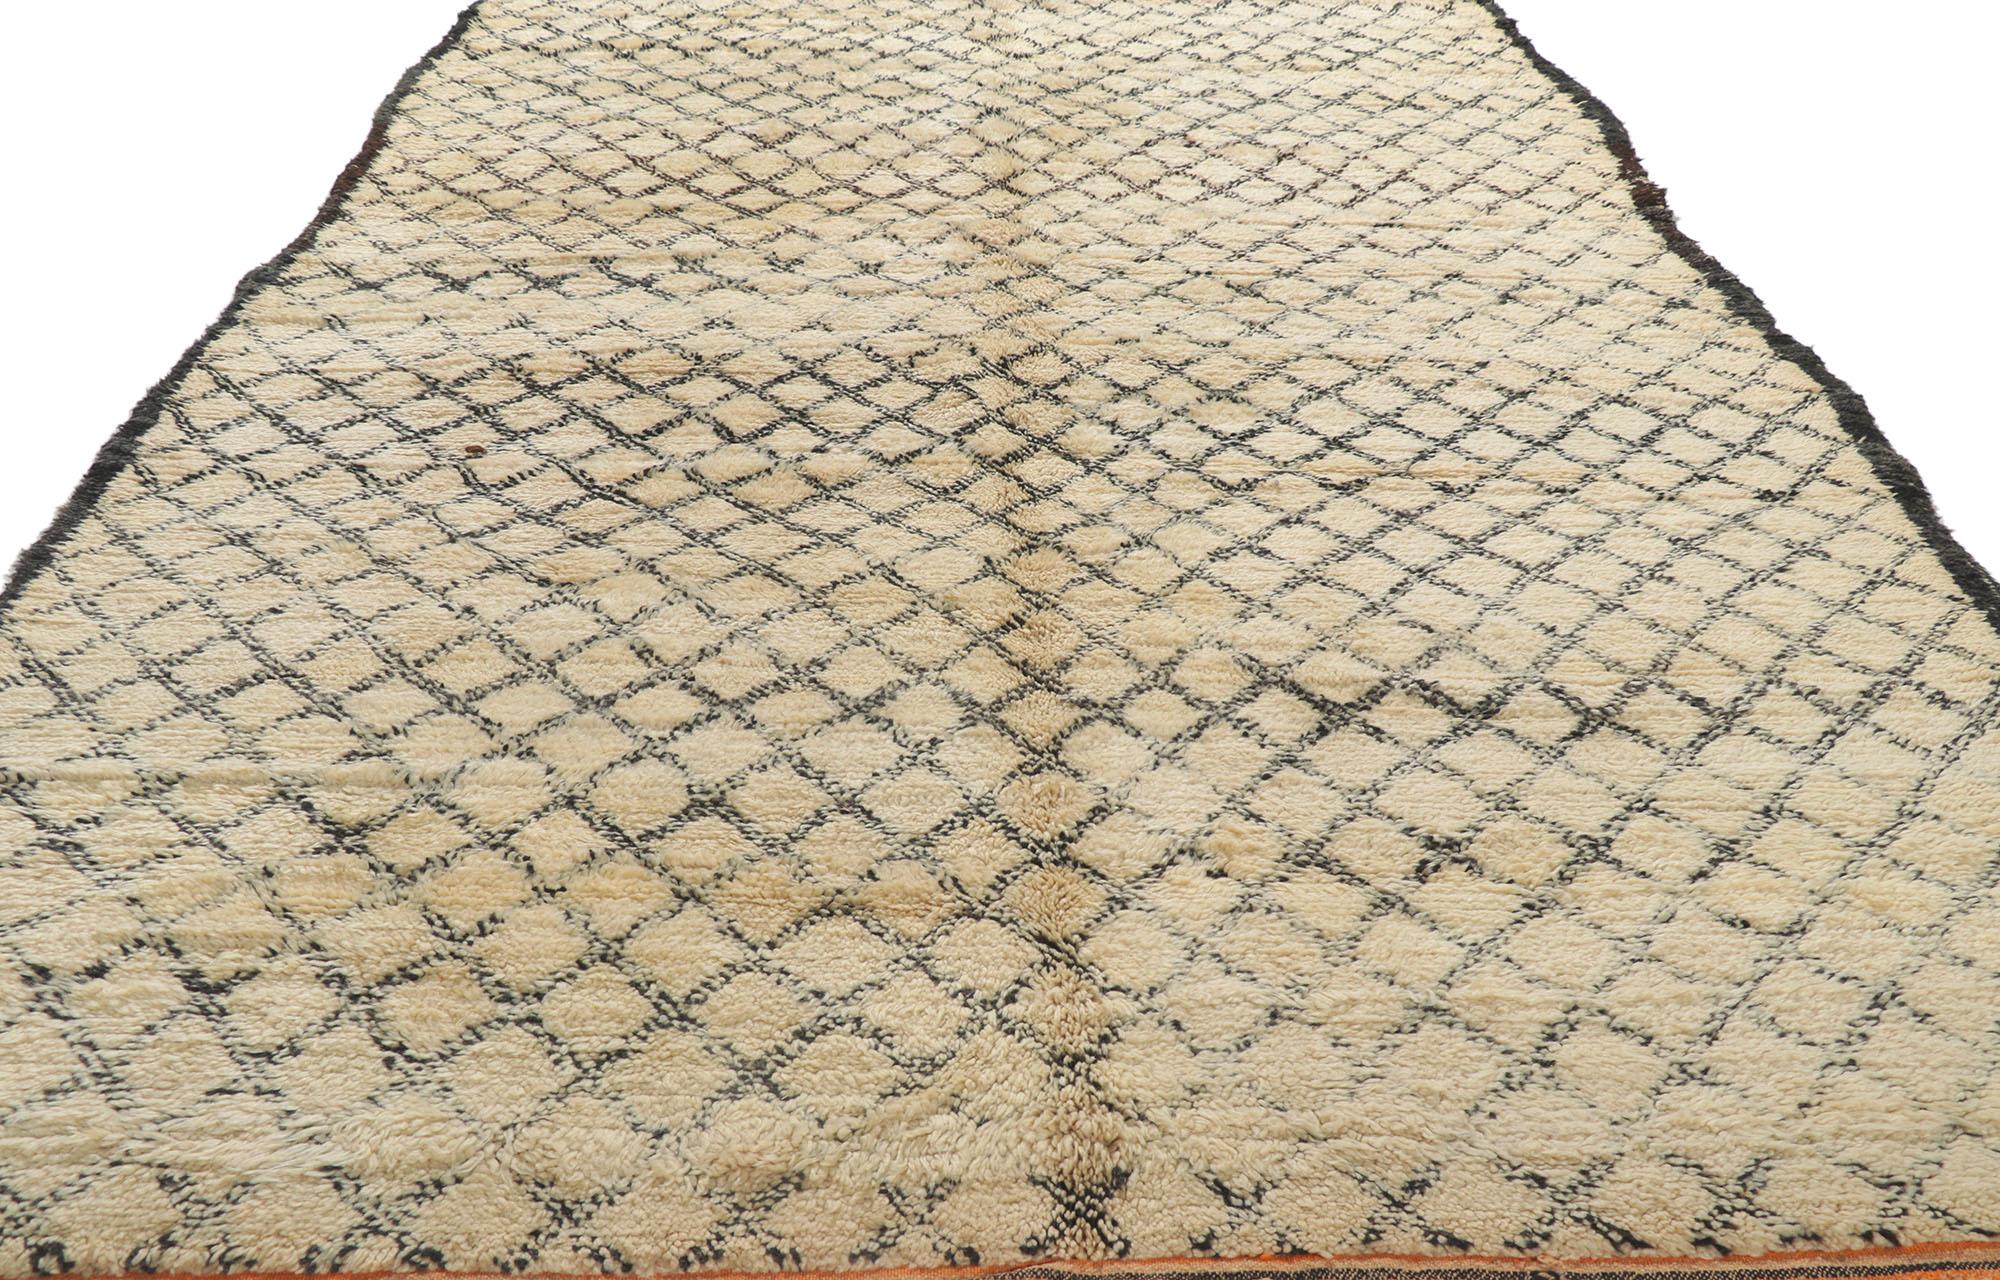 Hand-Knotted Vintage Moroccan Beni Ourain Rug, Cozy Boho Nomad Meets Midcentury Modern Style For Sale